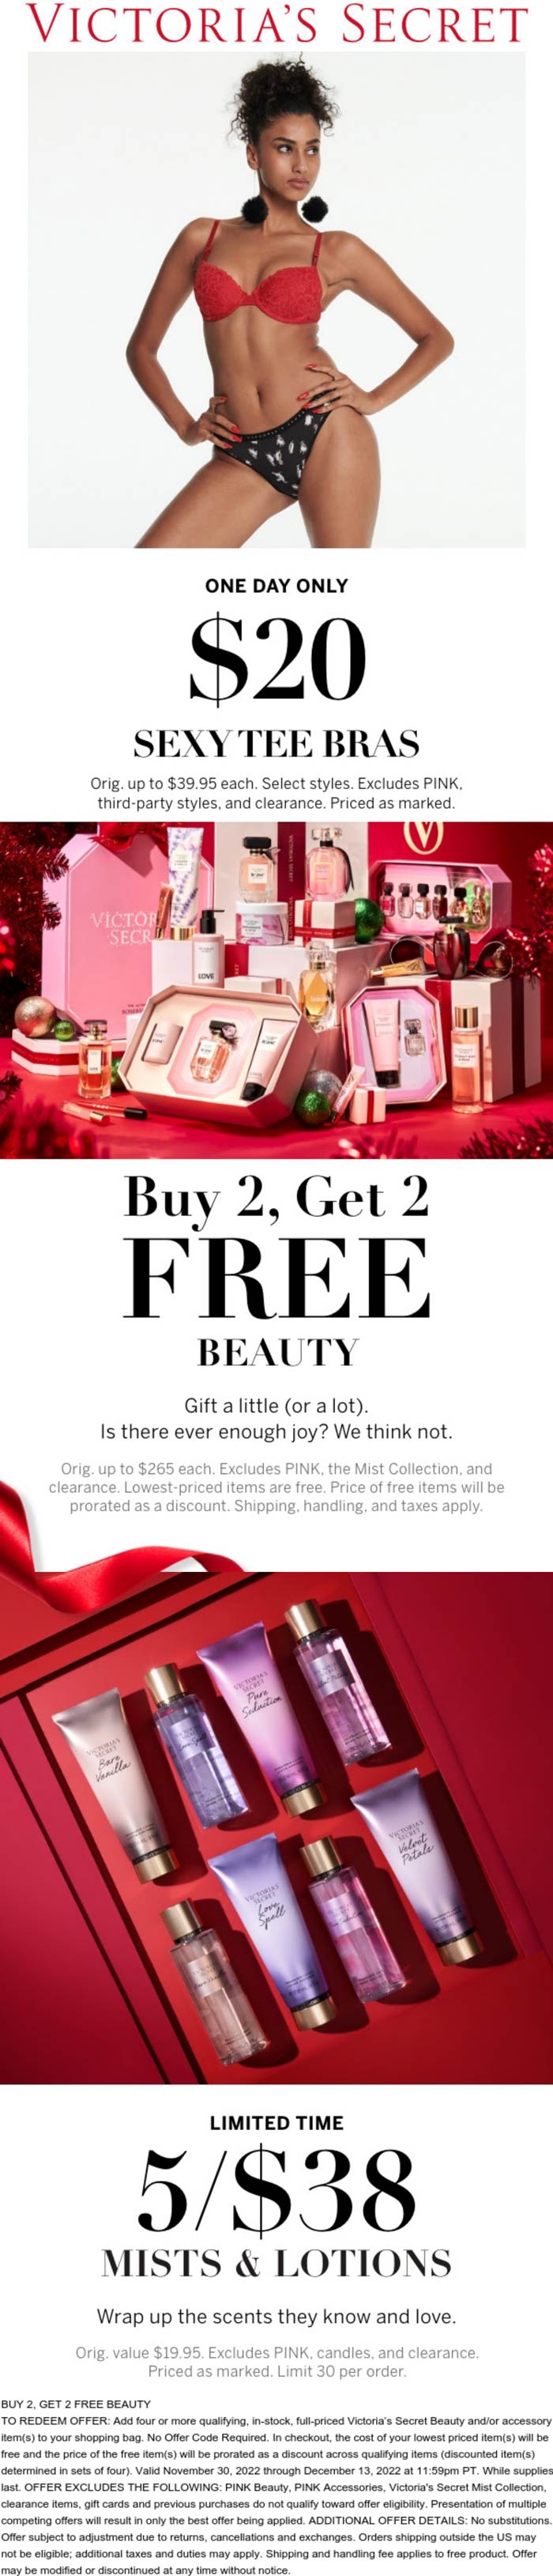 Victorias Secret stores Coupon  4-for-2 on beauty & accessories online at Victorias Secret #victoriassecret 